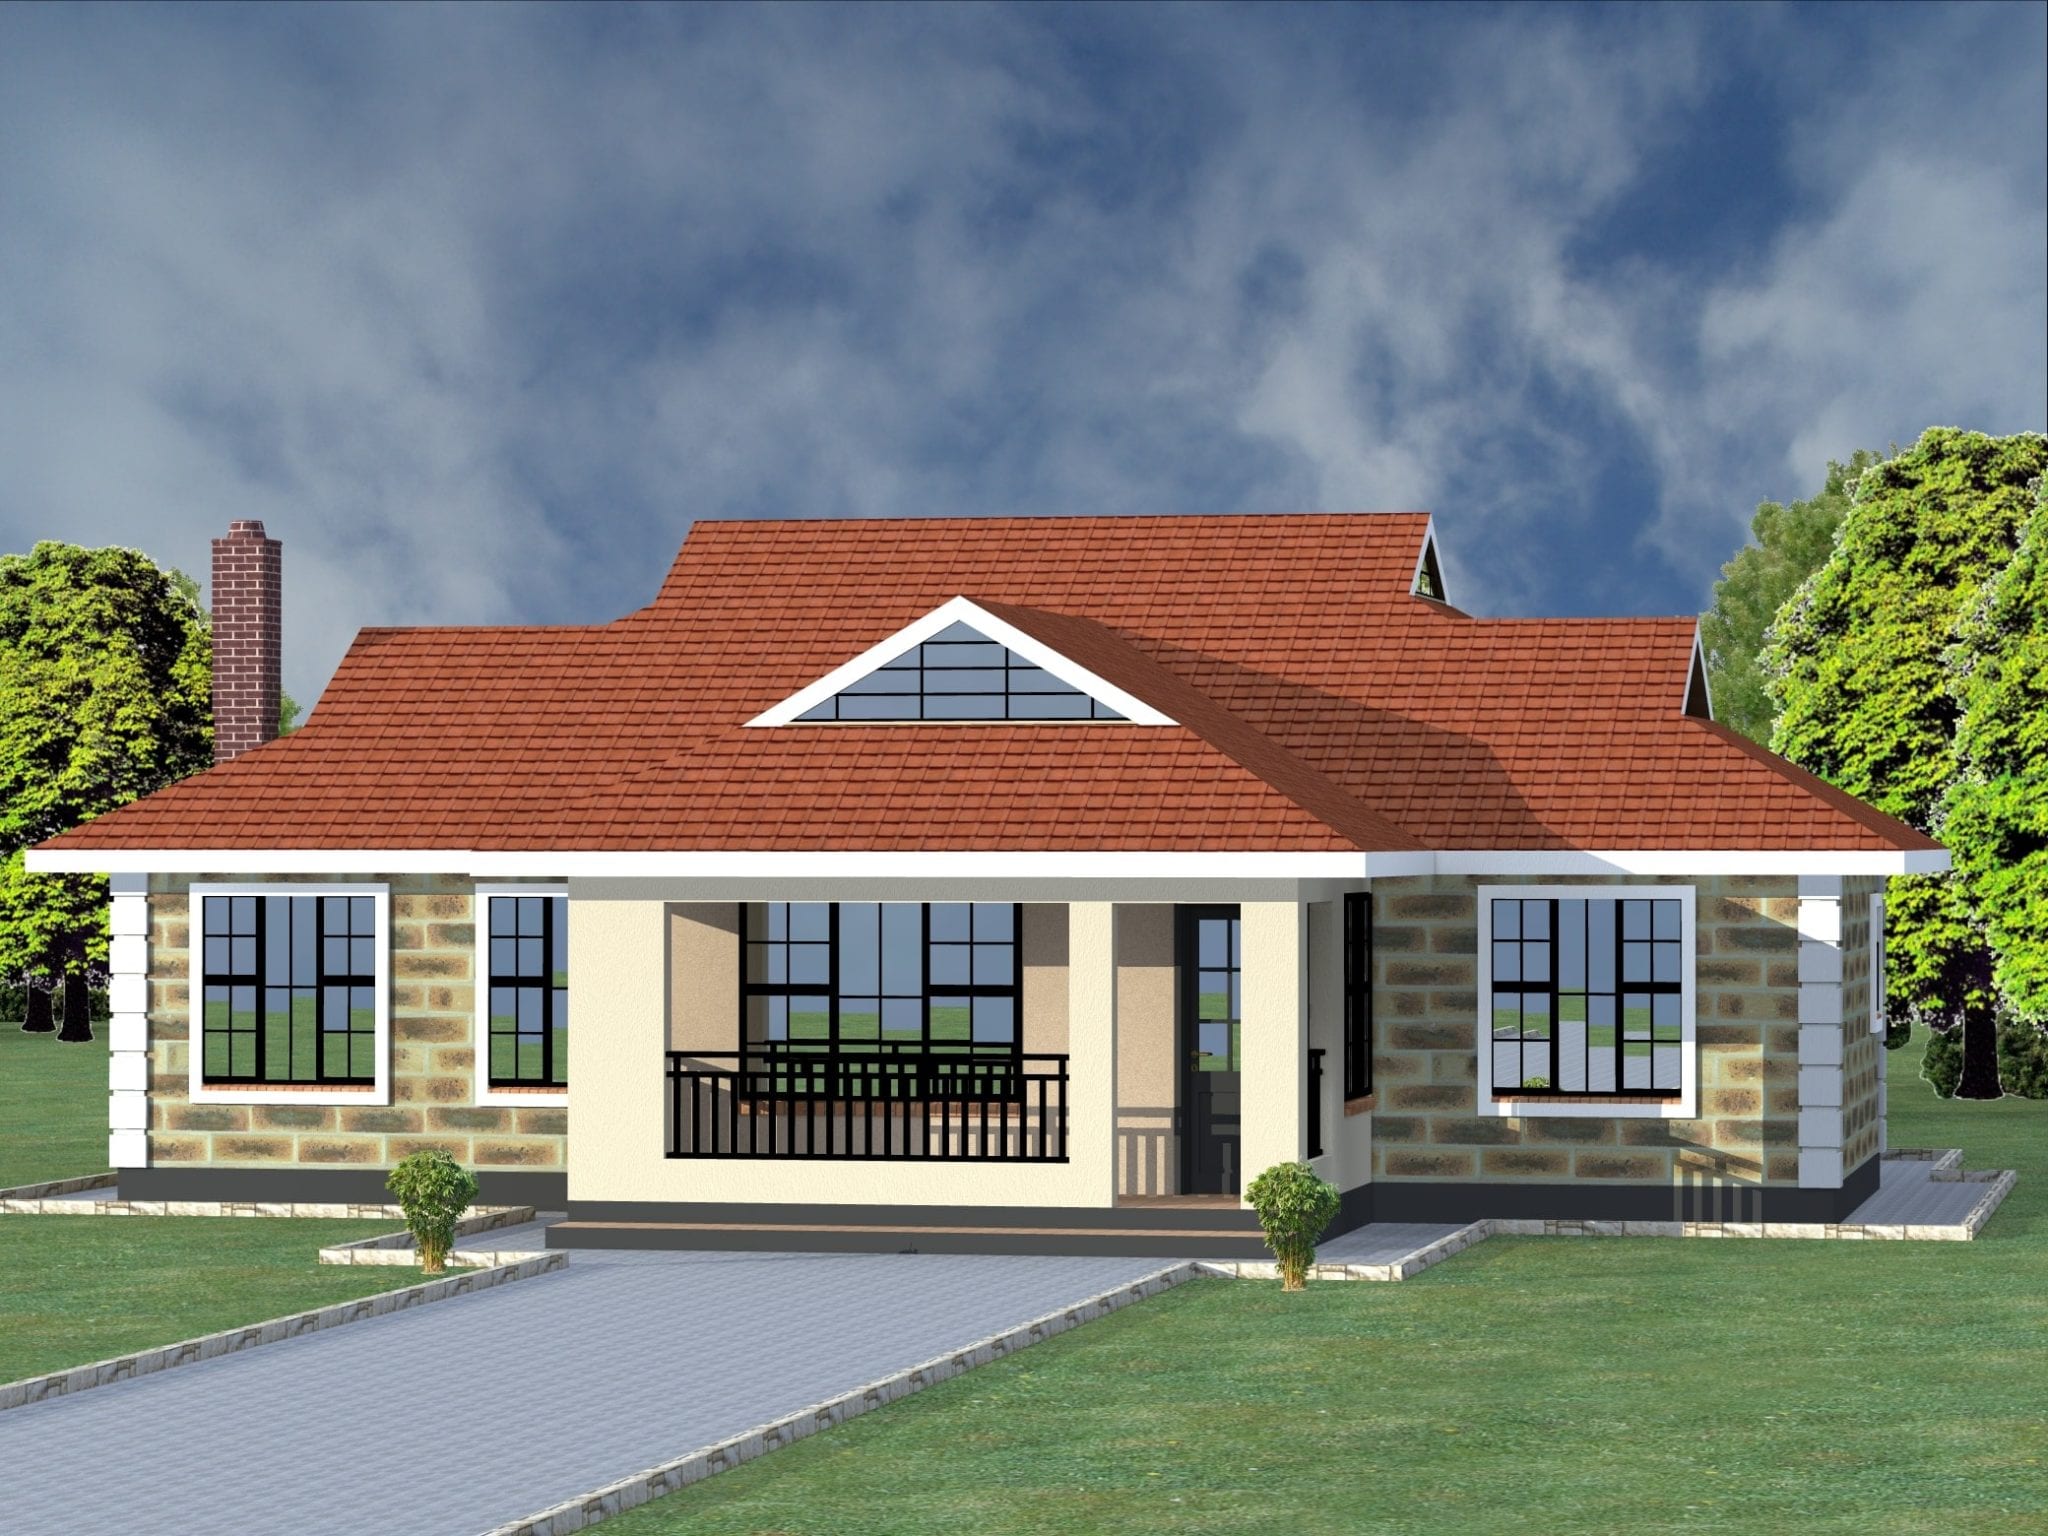 4 Bedroom House Plans Single Story | HPD Consult